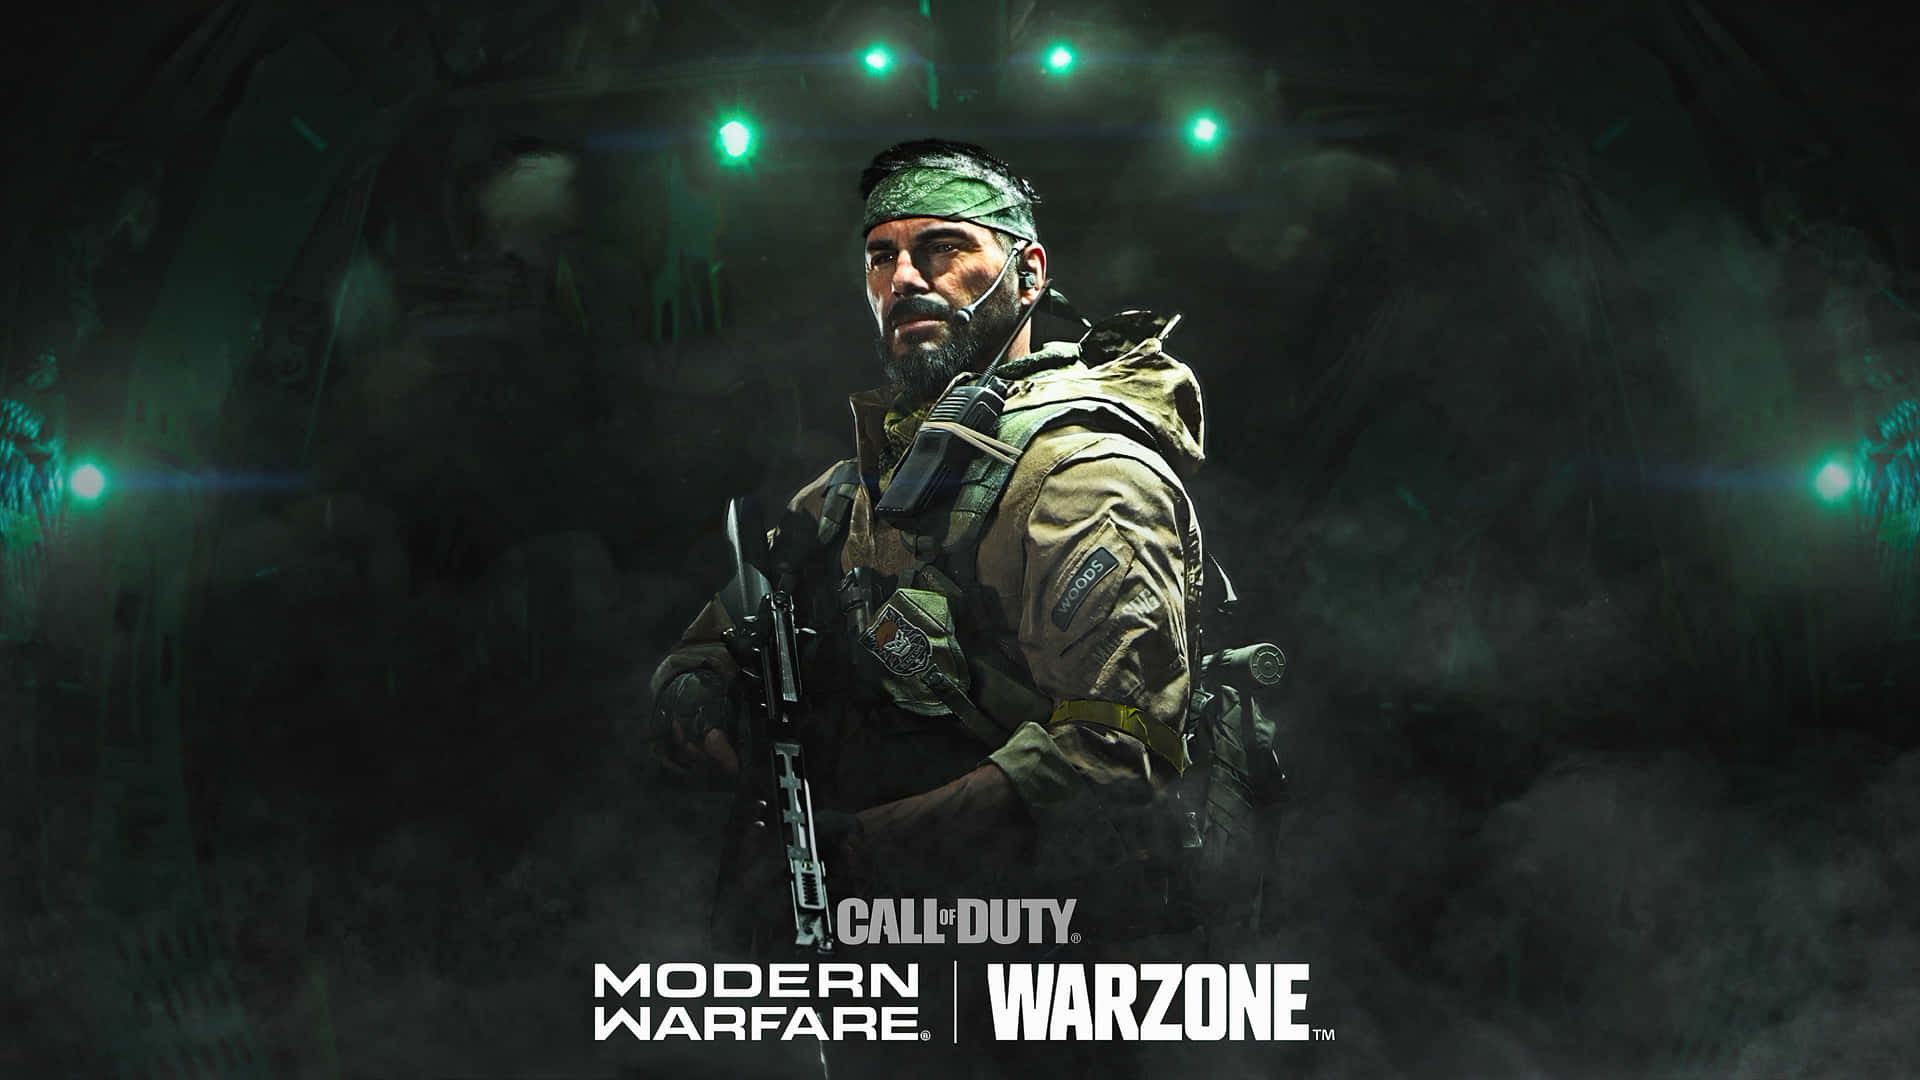 Take A Look At The Thrilling New World Of 'hd Call Of Duty Black Ops Cold War'